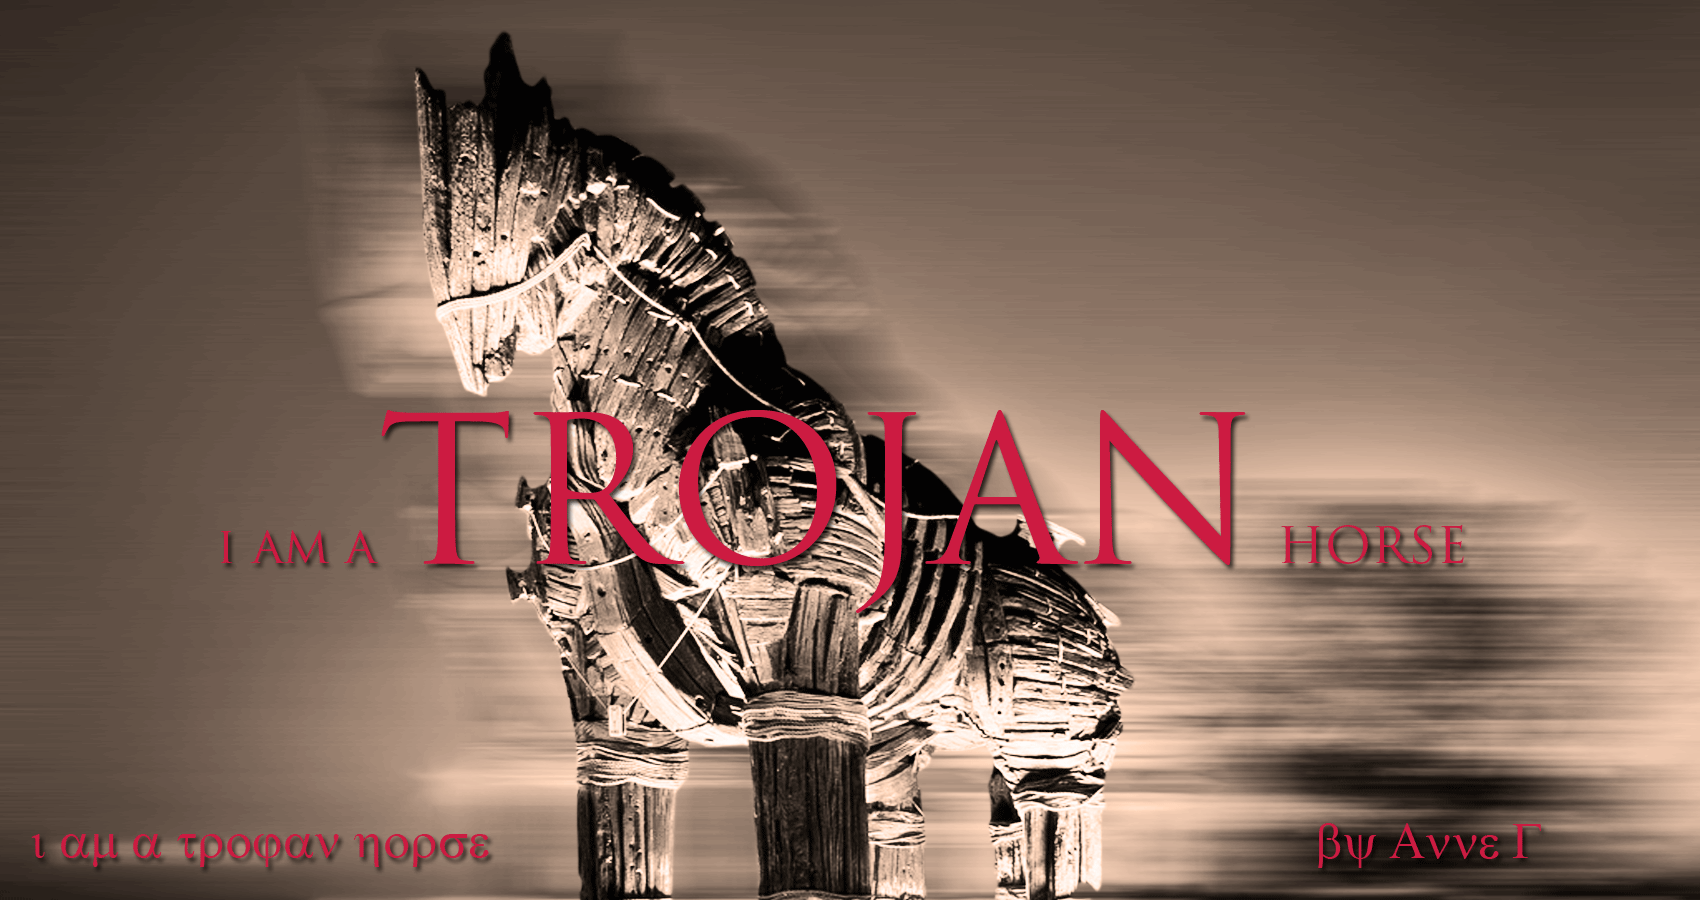 spillwords.com i Am A Trojan Horse by Anne G